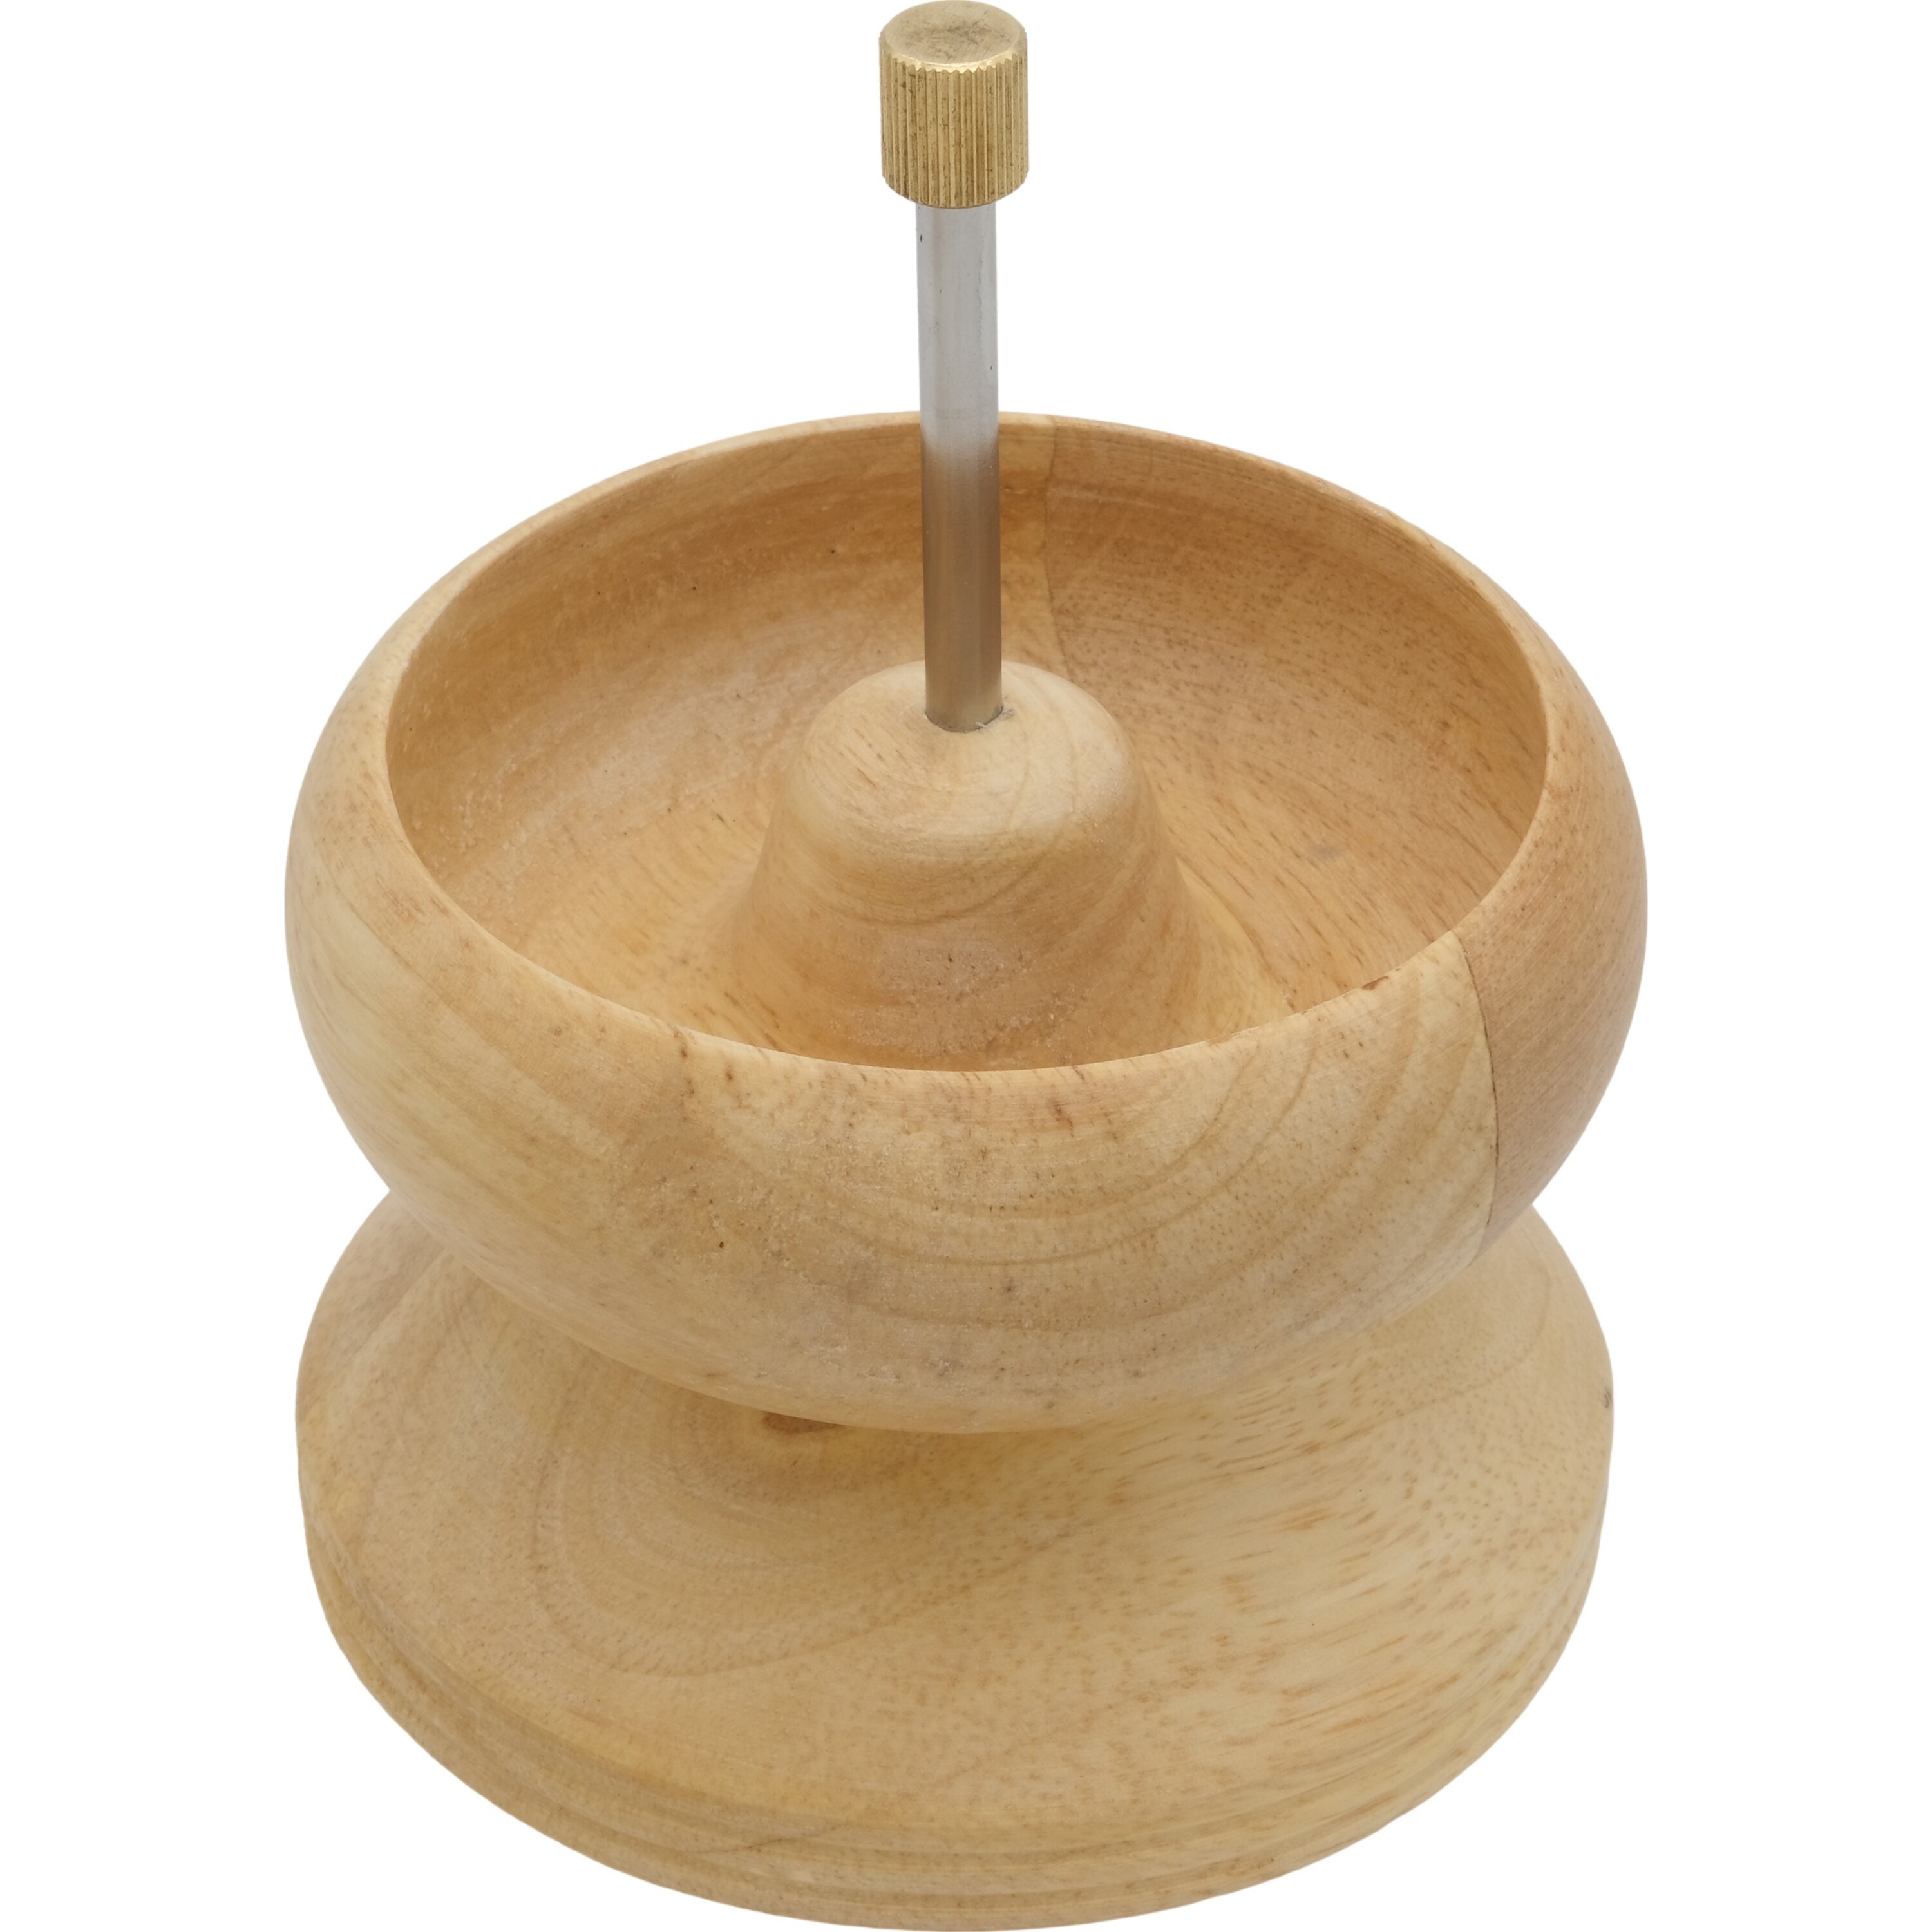 Hobbyworker Clay Bead Spinner,Rotating Bead Bowl for Making Jewelry, Q